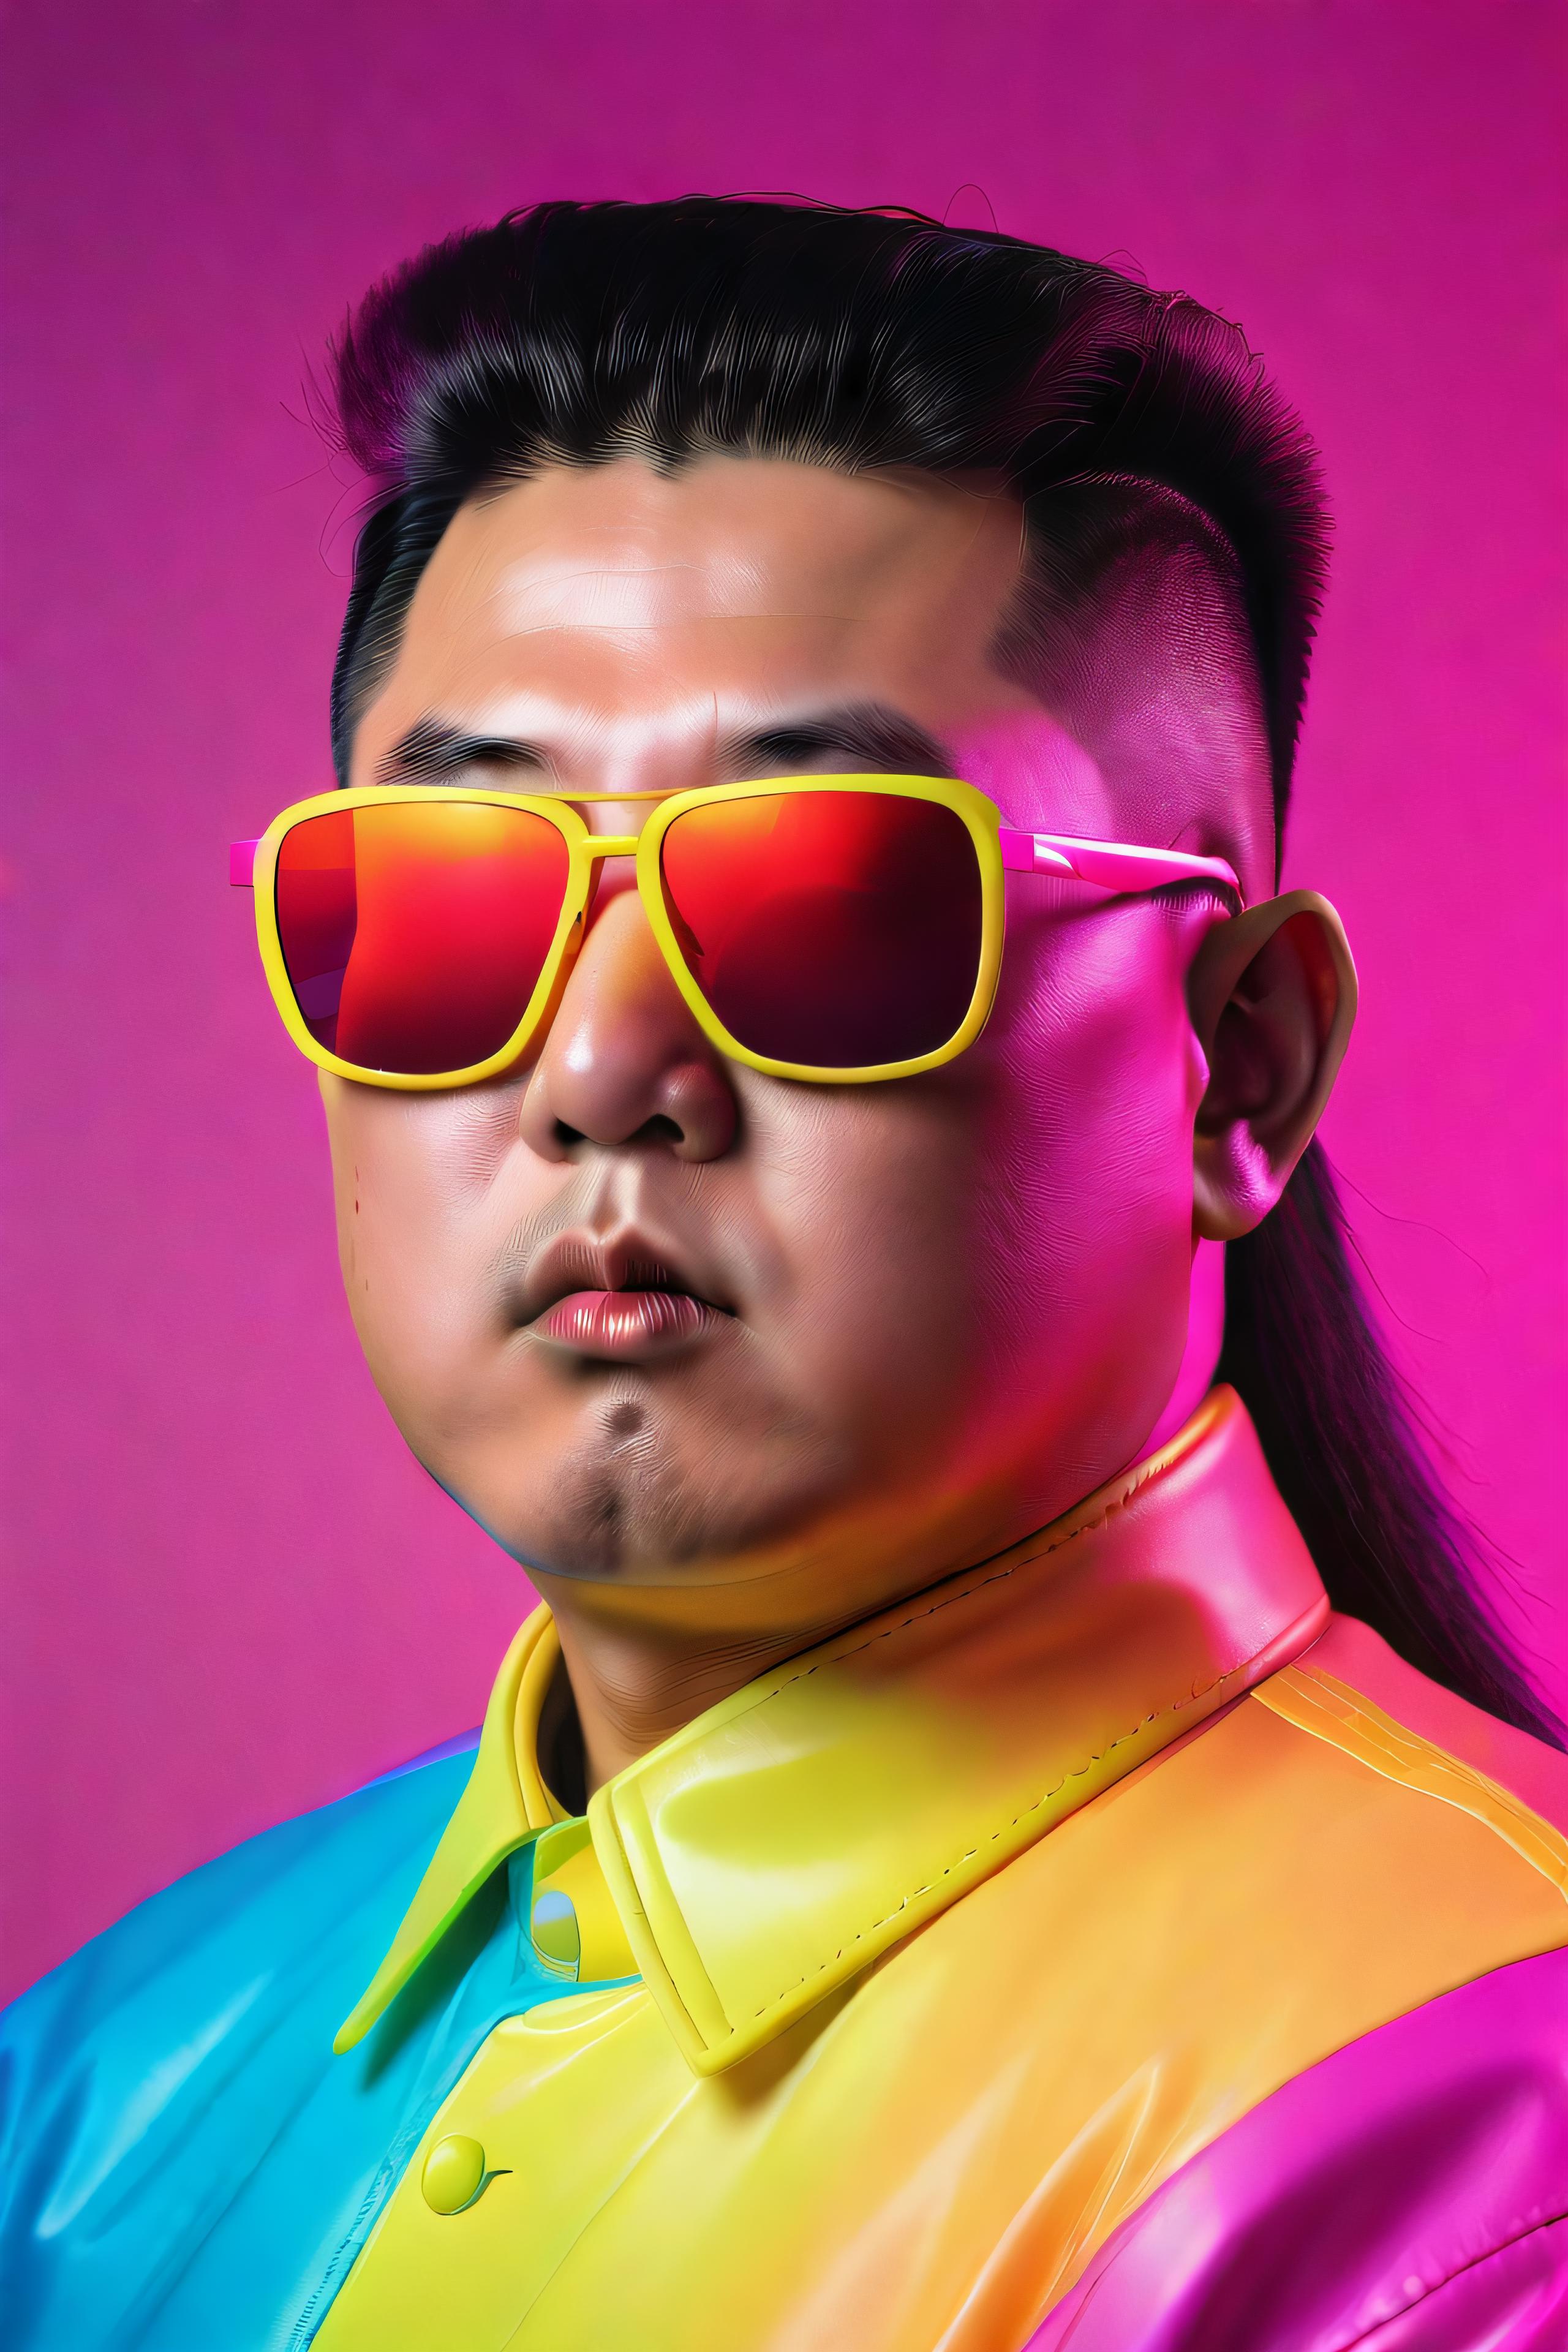 A man with a pink background, yellow shirt, and colorful hair wearing yellow sunglasses.